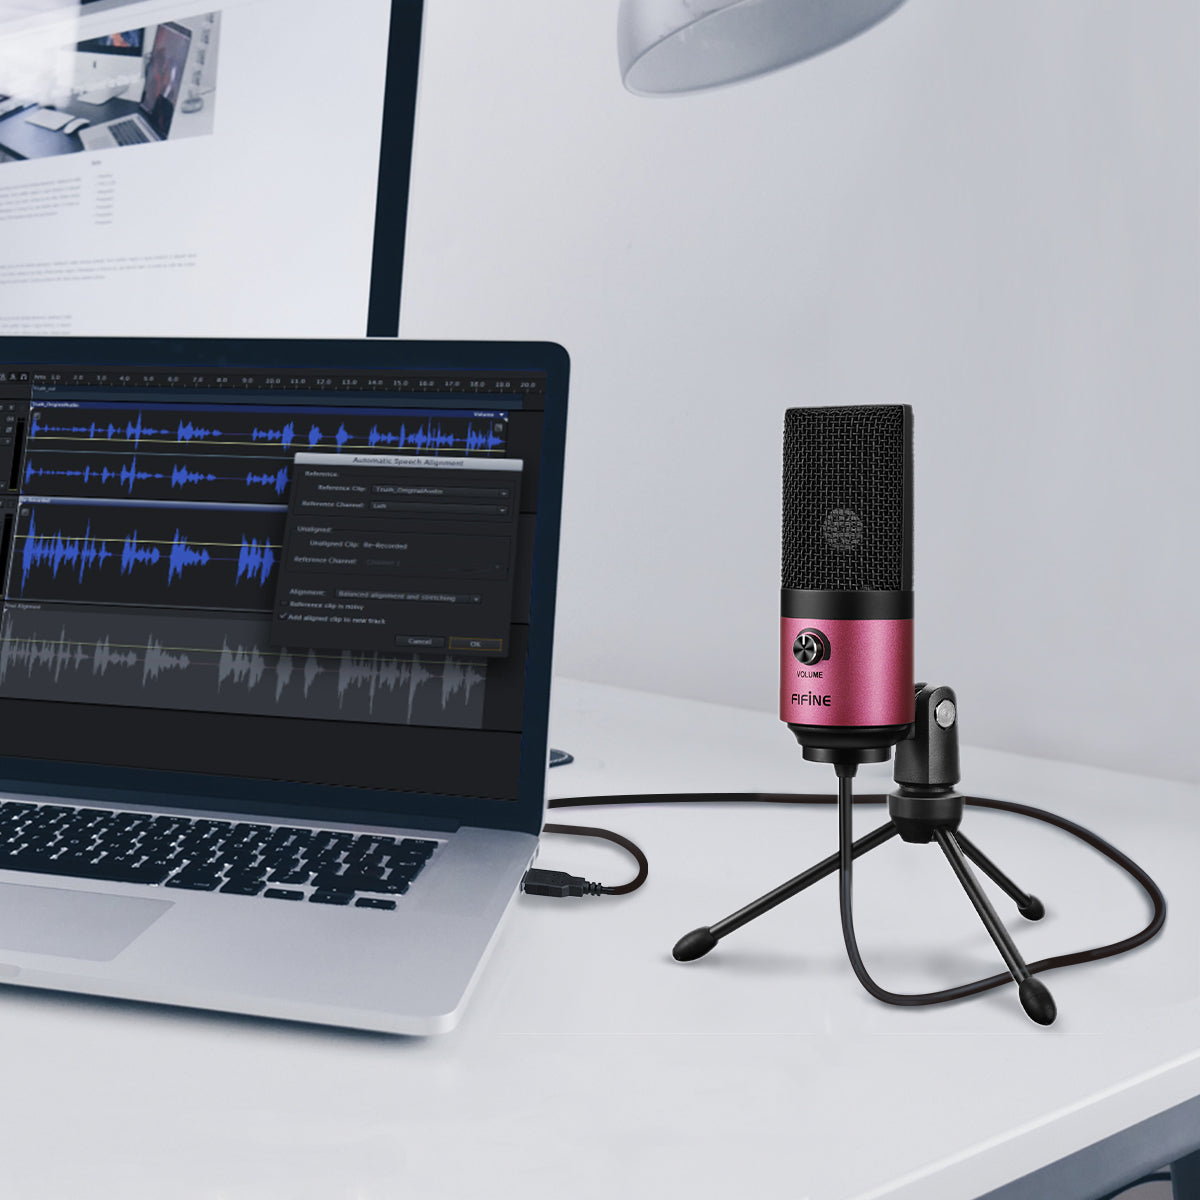 FIFINE K669 USB Microphone with Volume Dial for Streaming, Vocal Recording, Podcasting on Computer